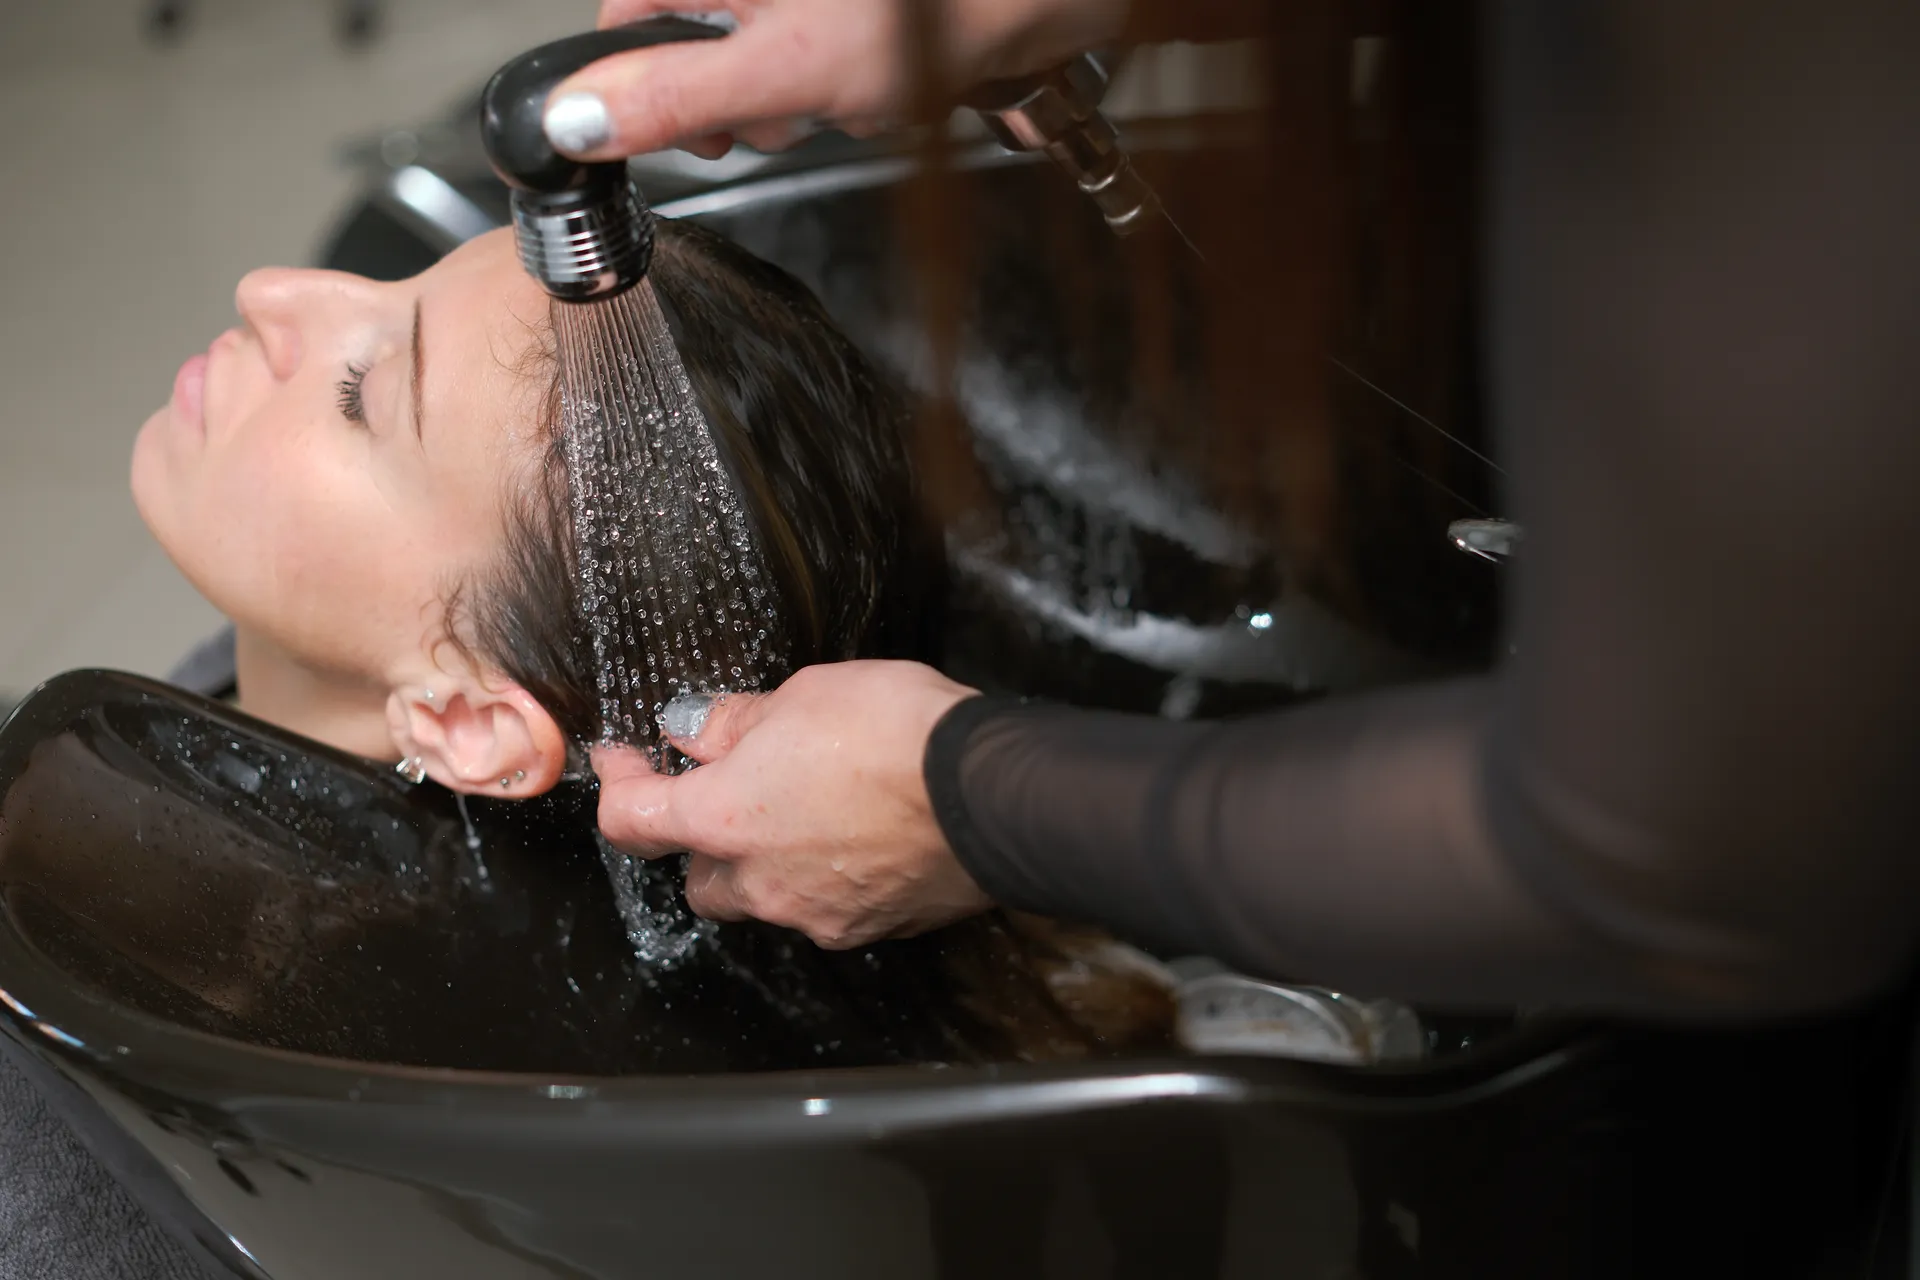 A client's hair is rinsed in a salon basin.